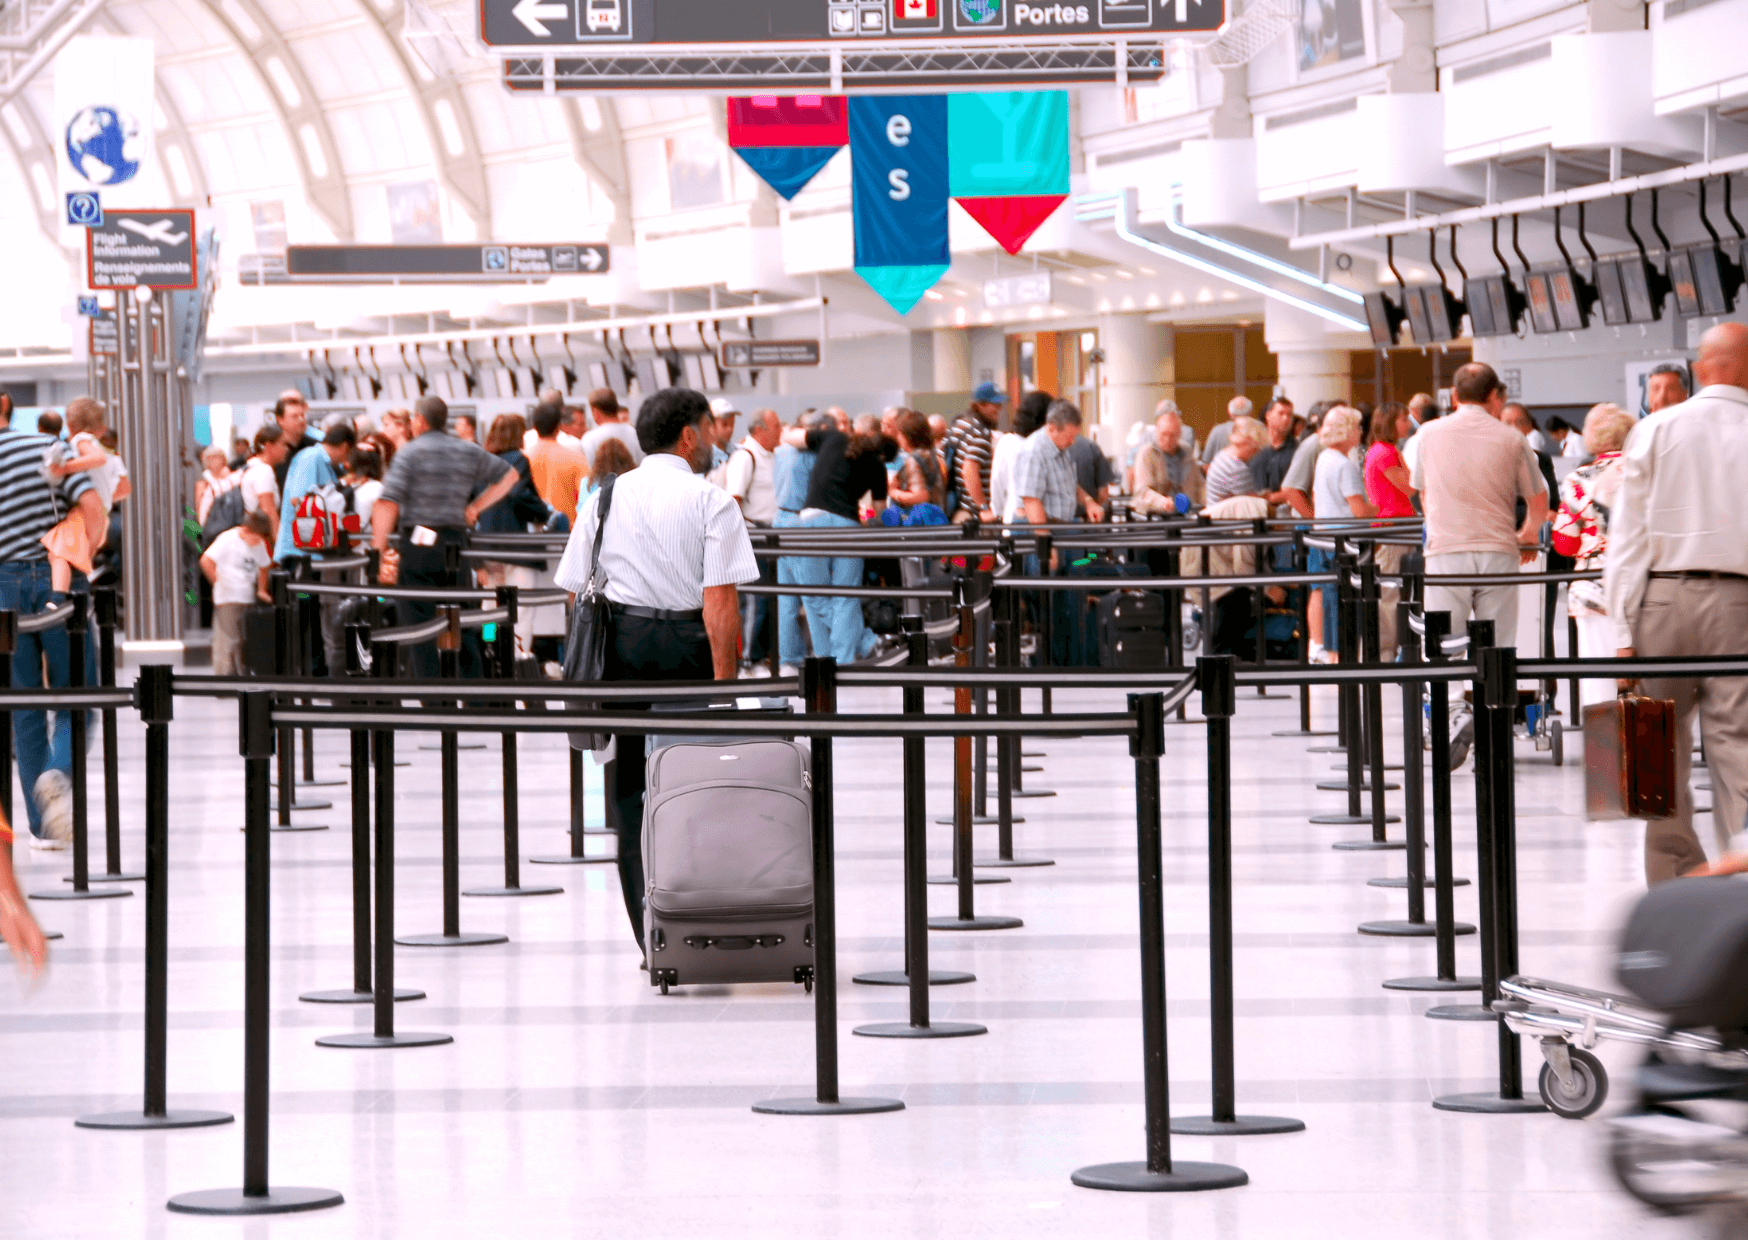 Long security lines at the airport